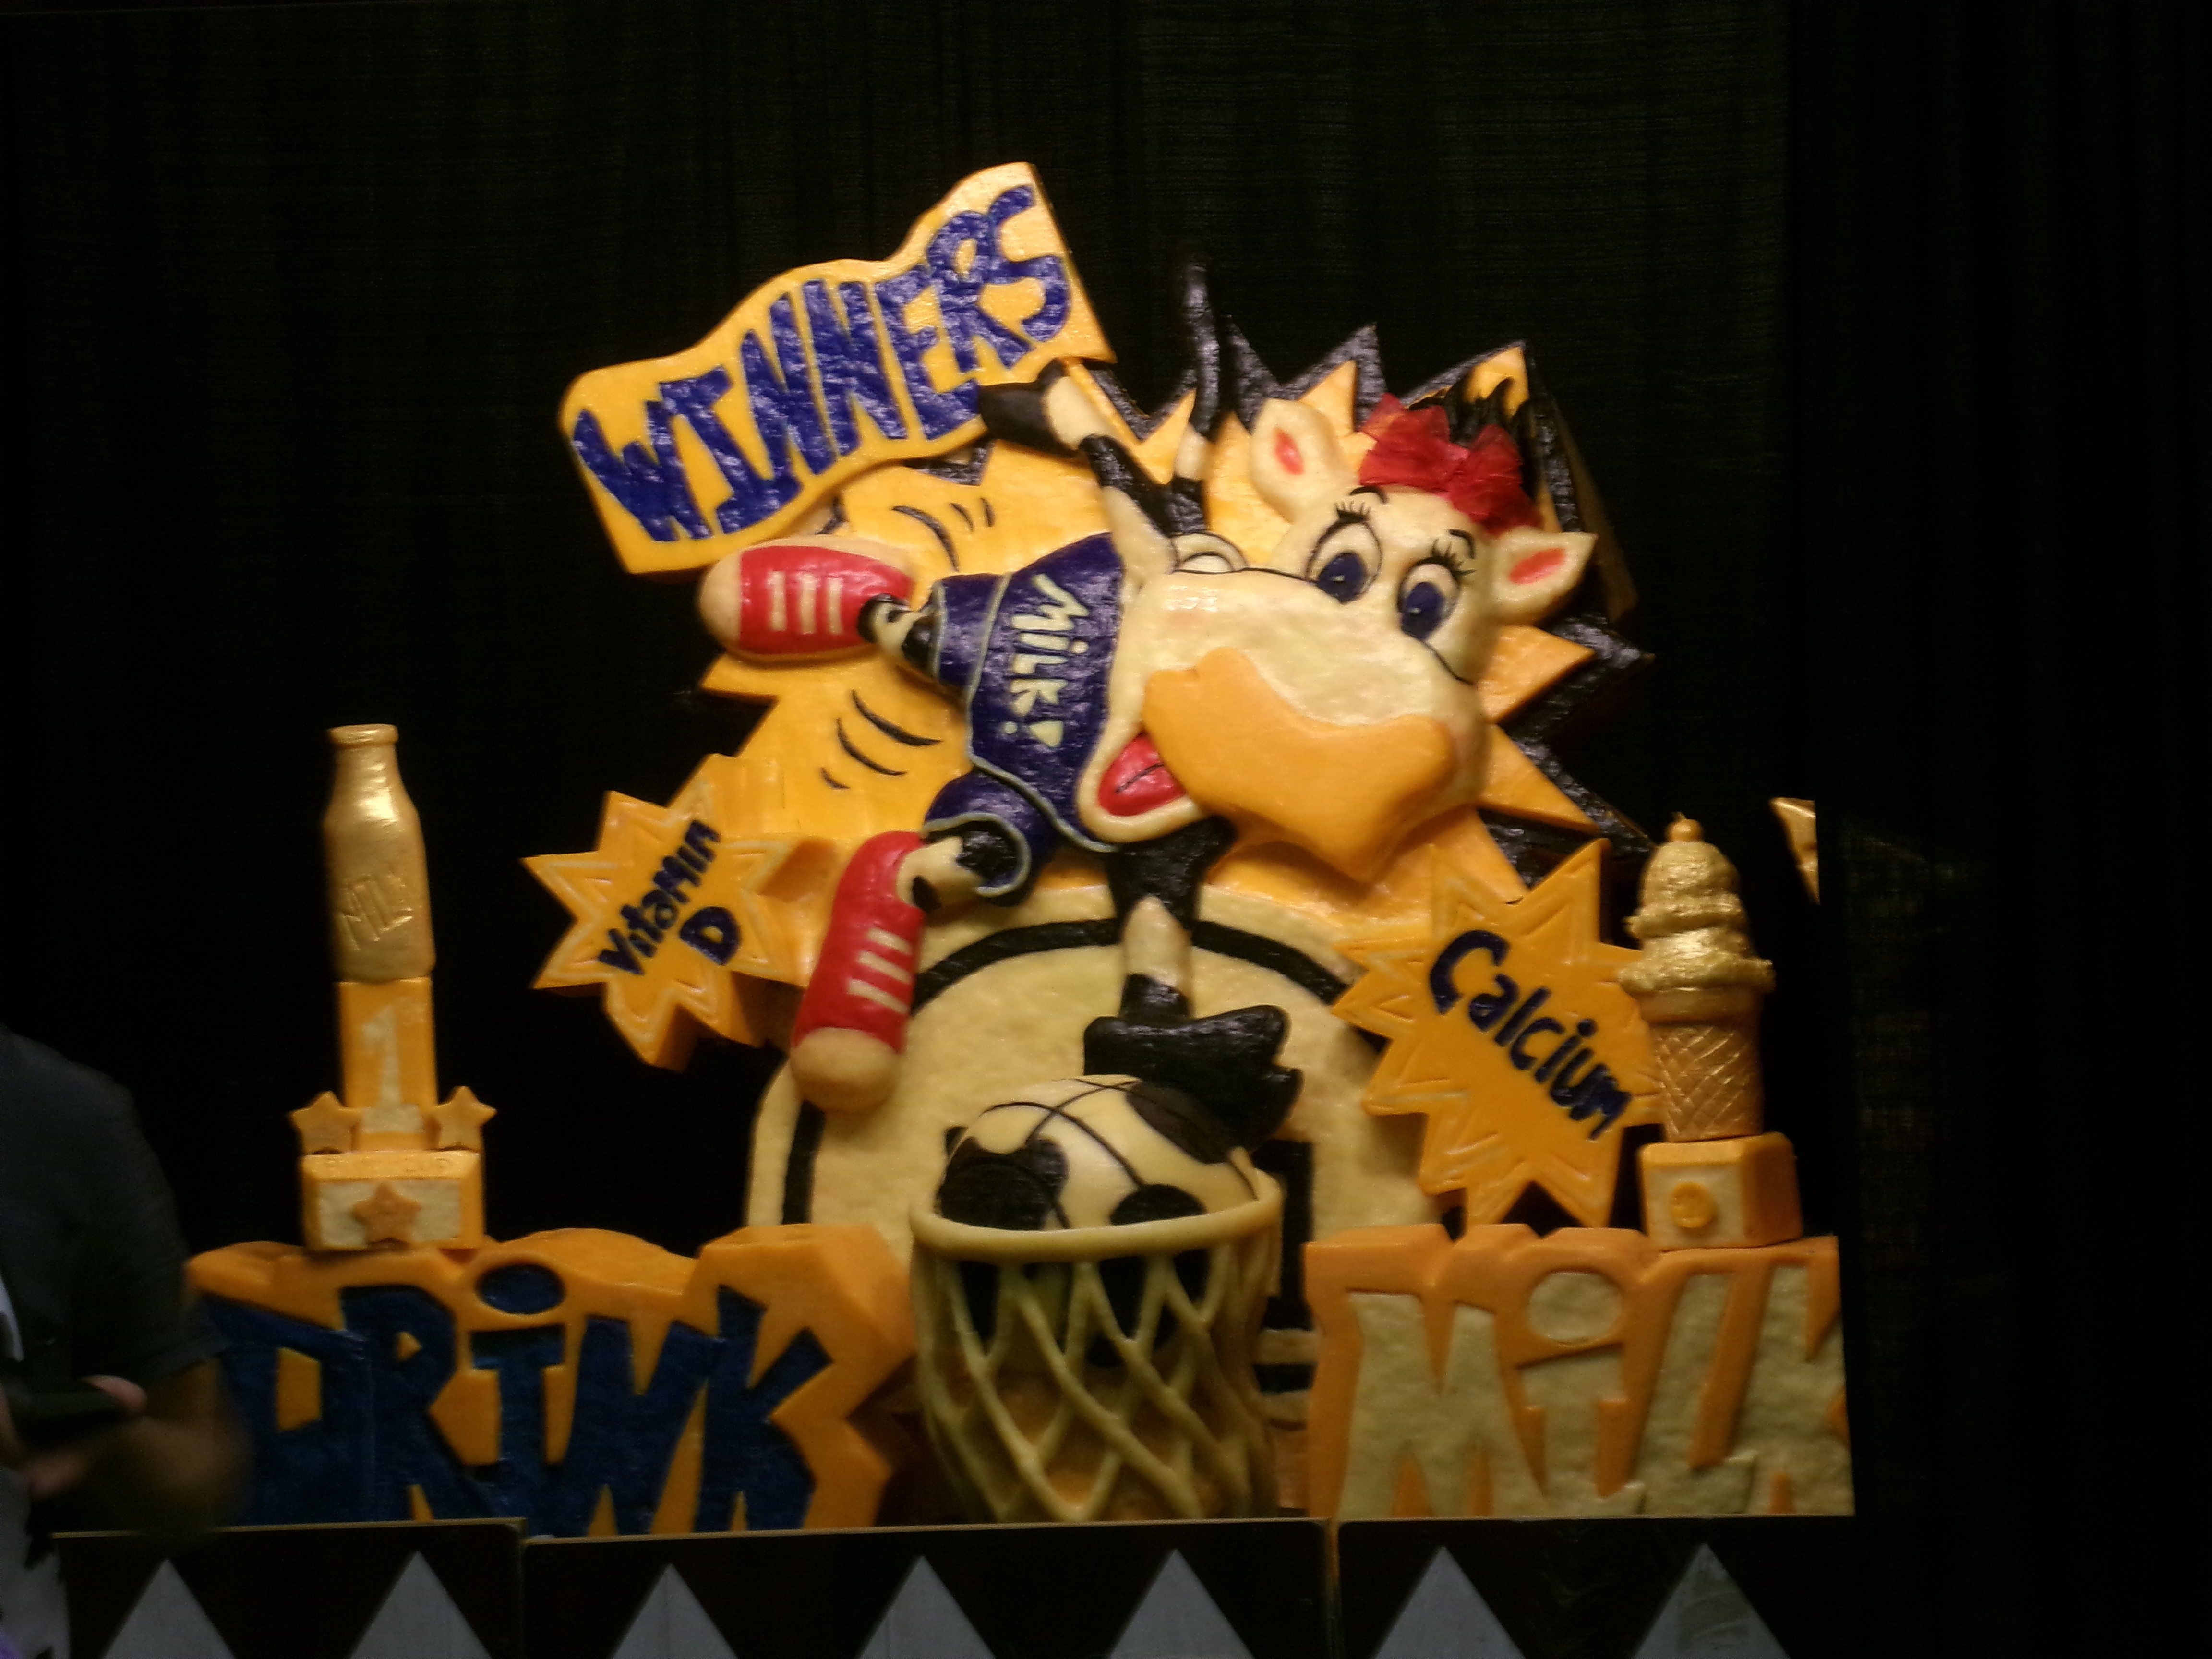 The cheese sculpture is complete